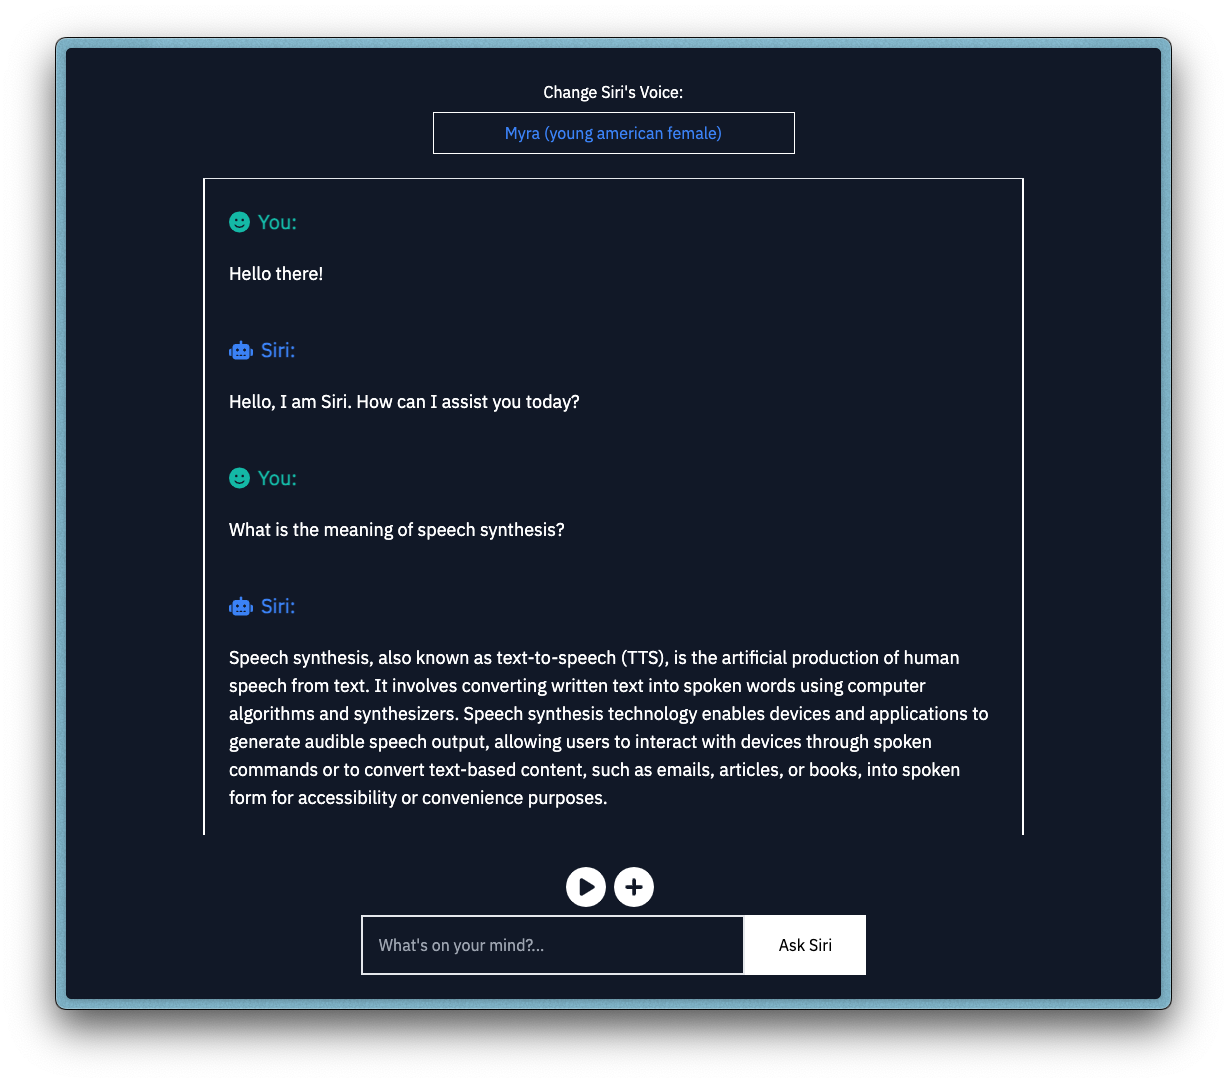 The resulting UI of the project